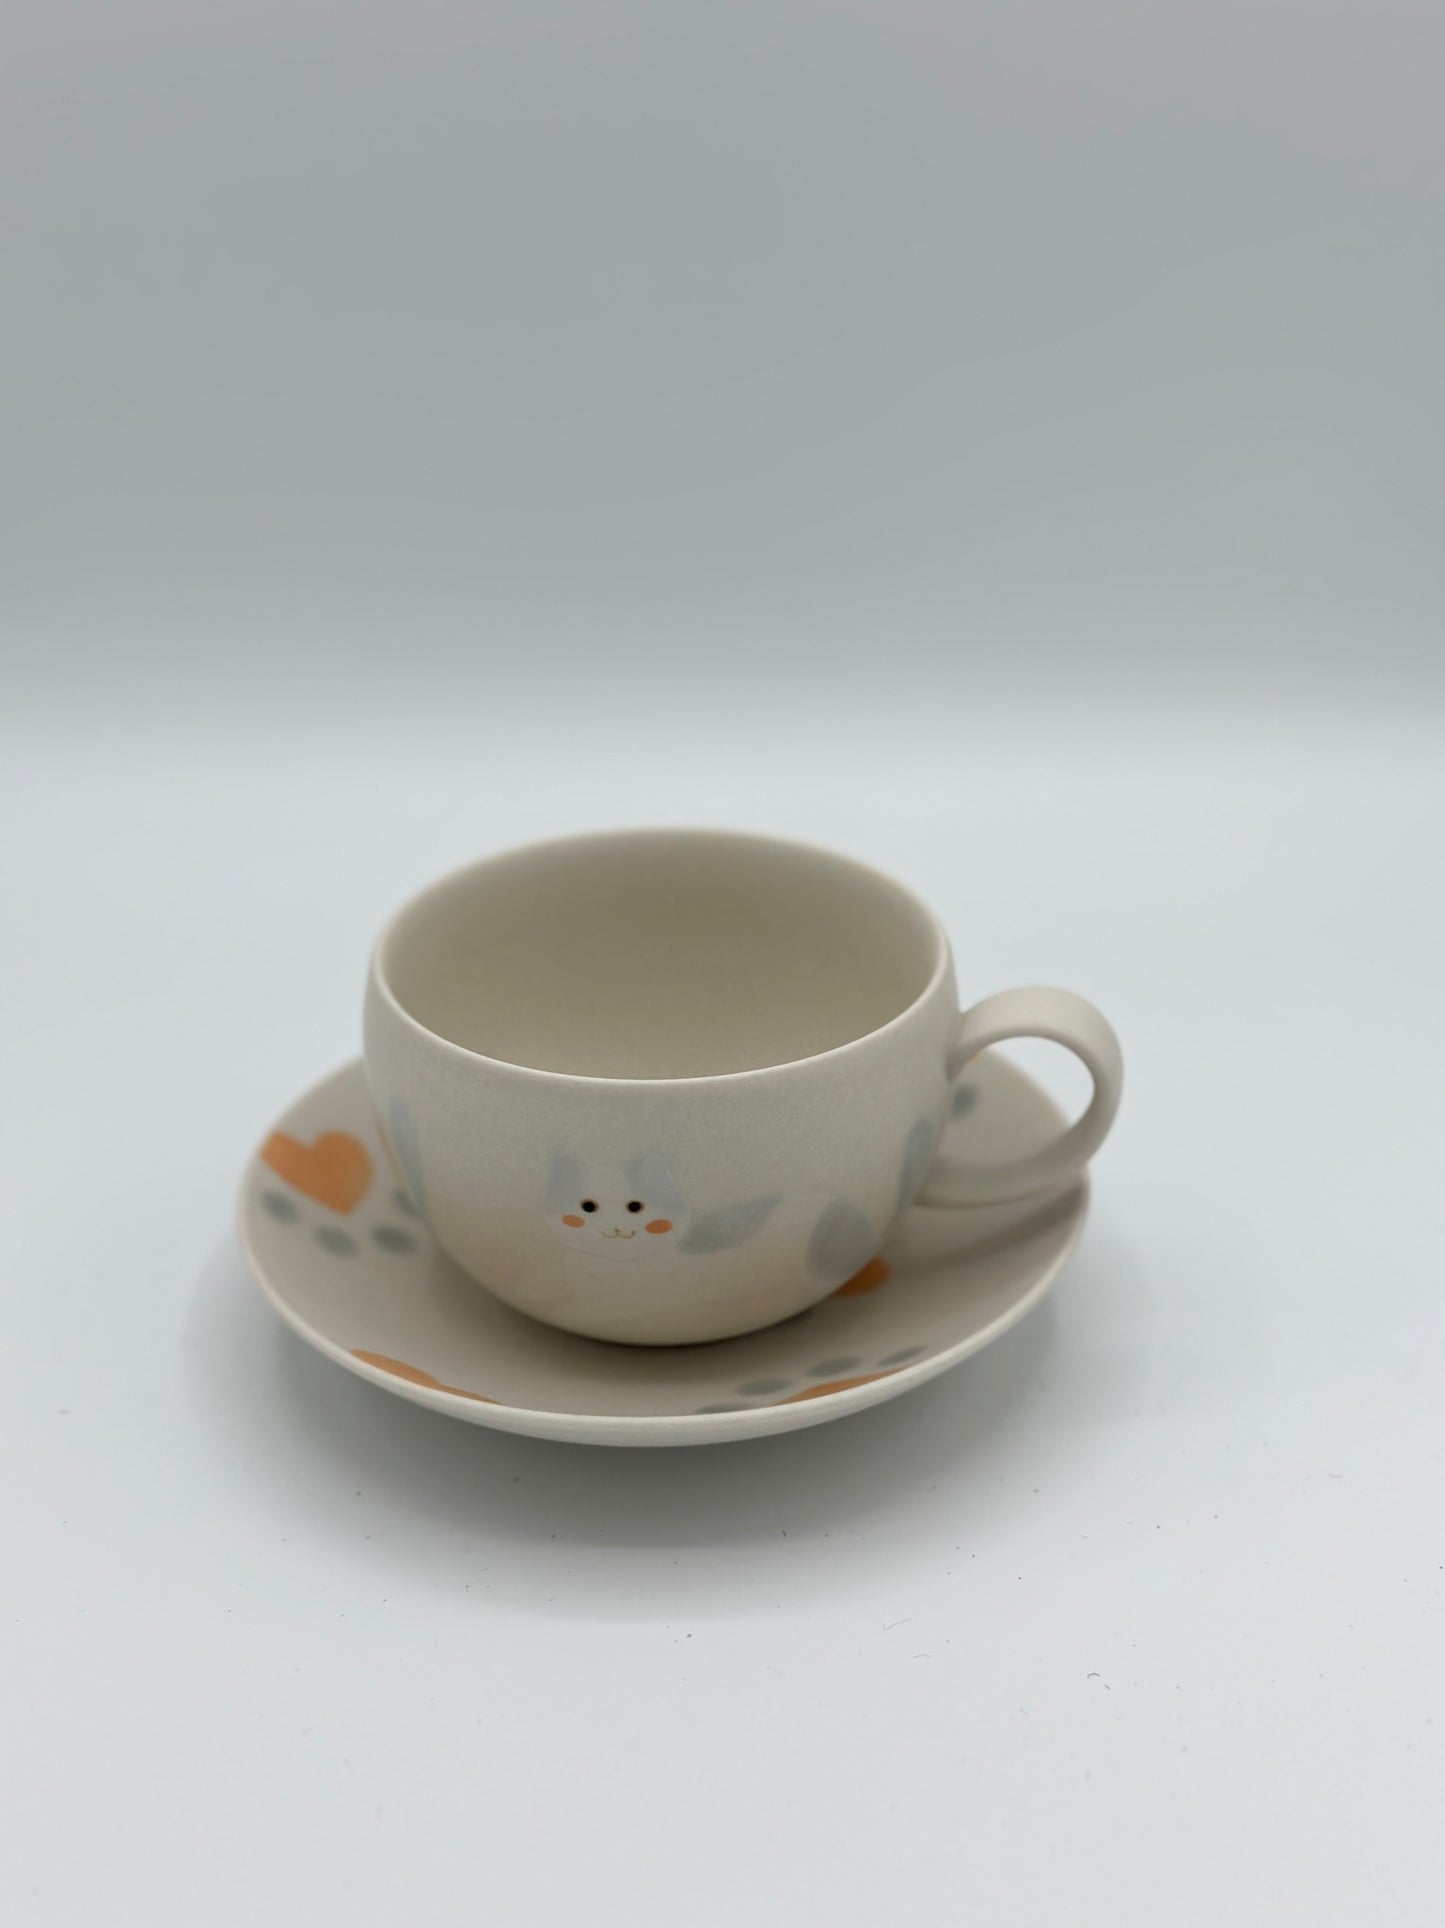 Yezi's Handcrafted Meow Cup and Saucer Set